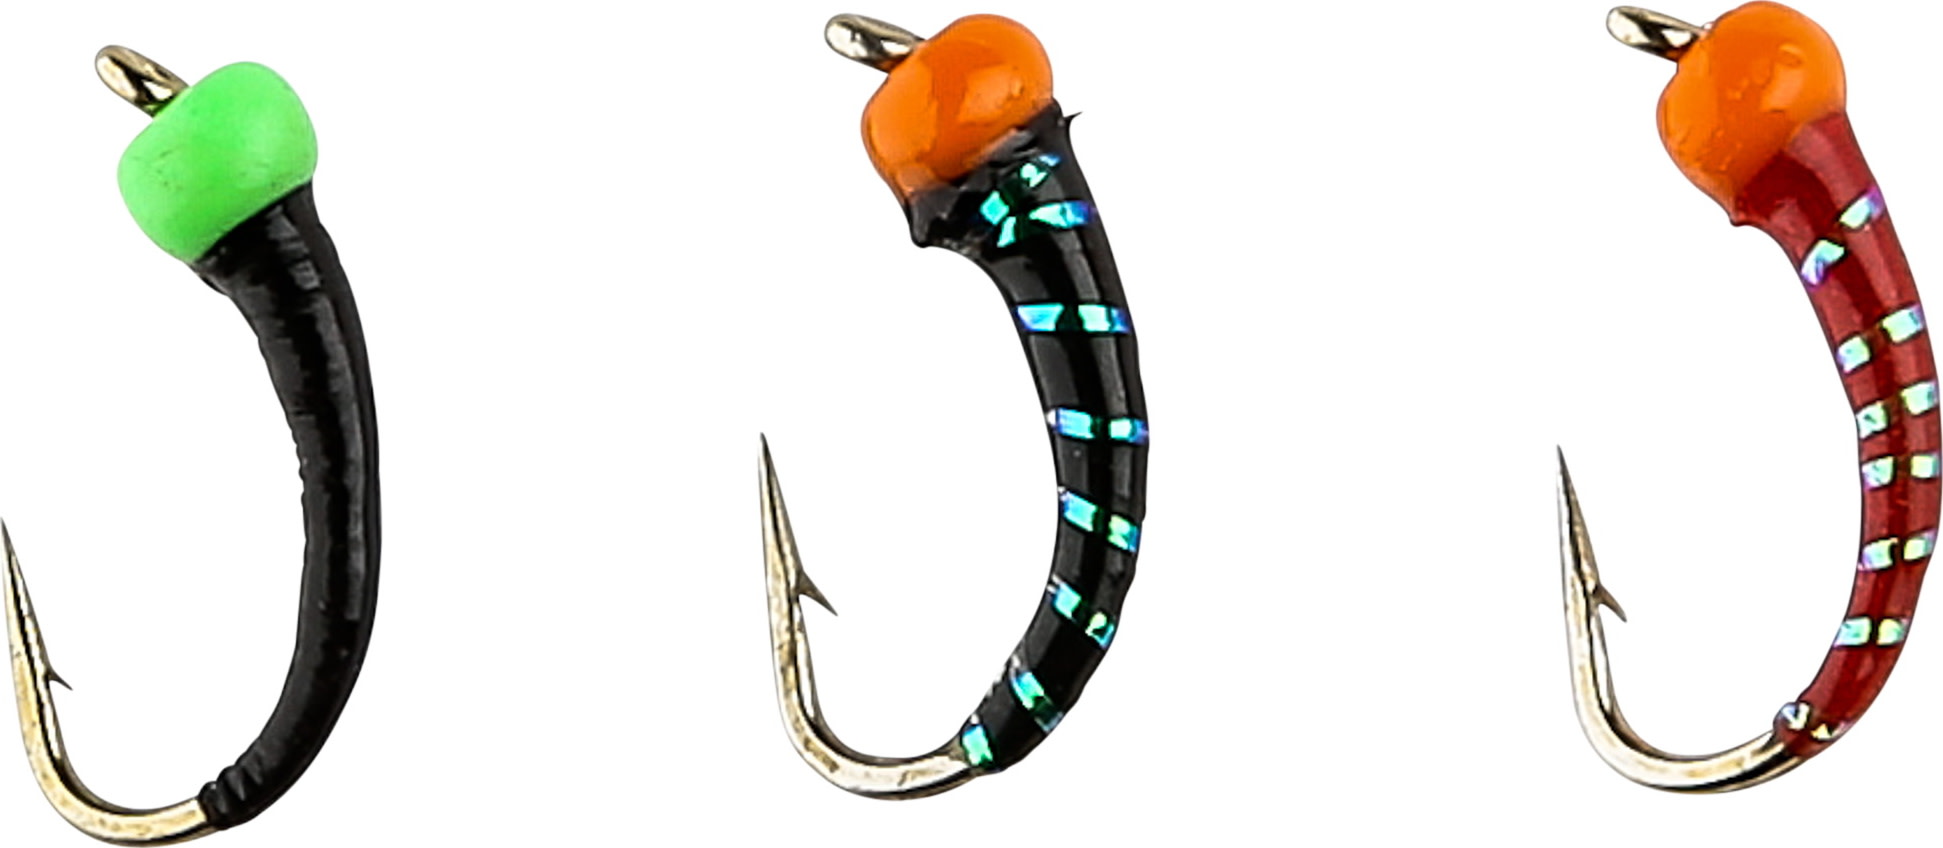 iFish No-Twist Steel Leader With Safety OneColour